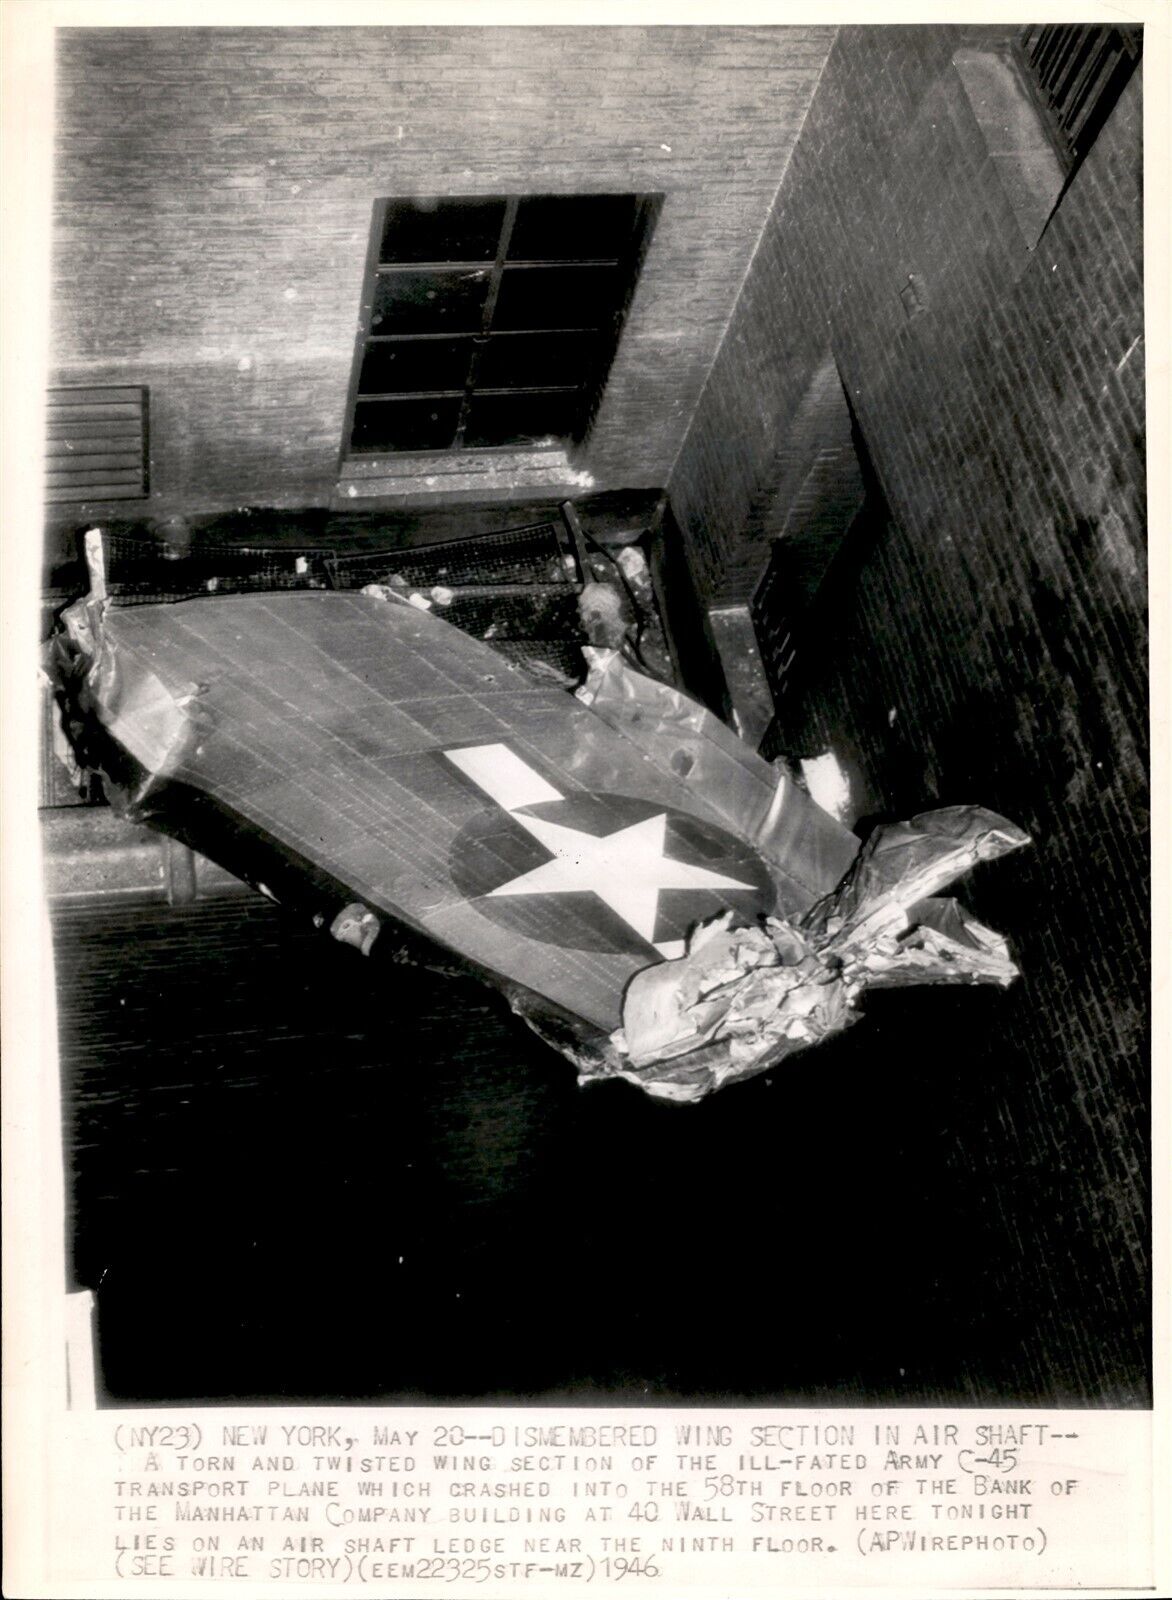 LD352 1946 Oversize Wire Photo WING SECTION ARMY C-45 PLANE CRASH IN MANHATTAN